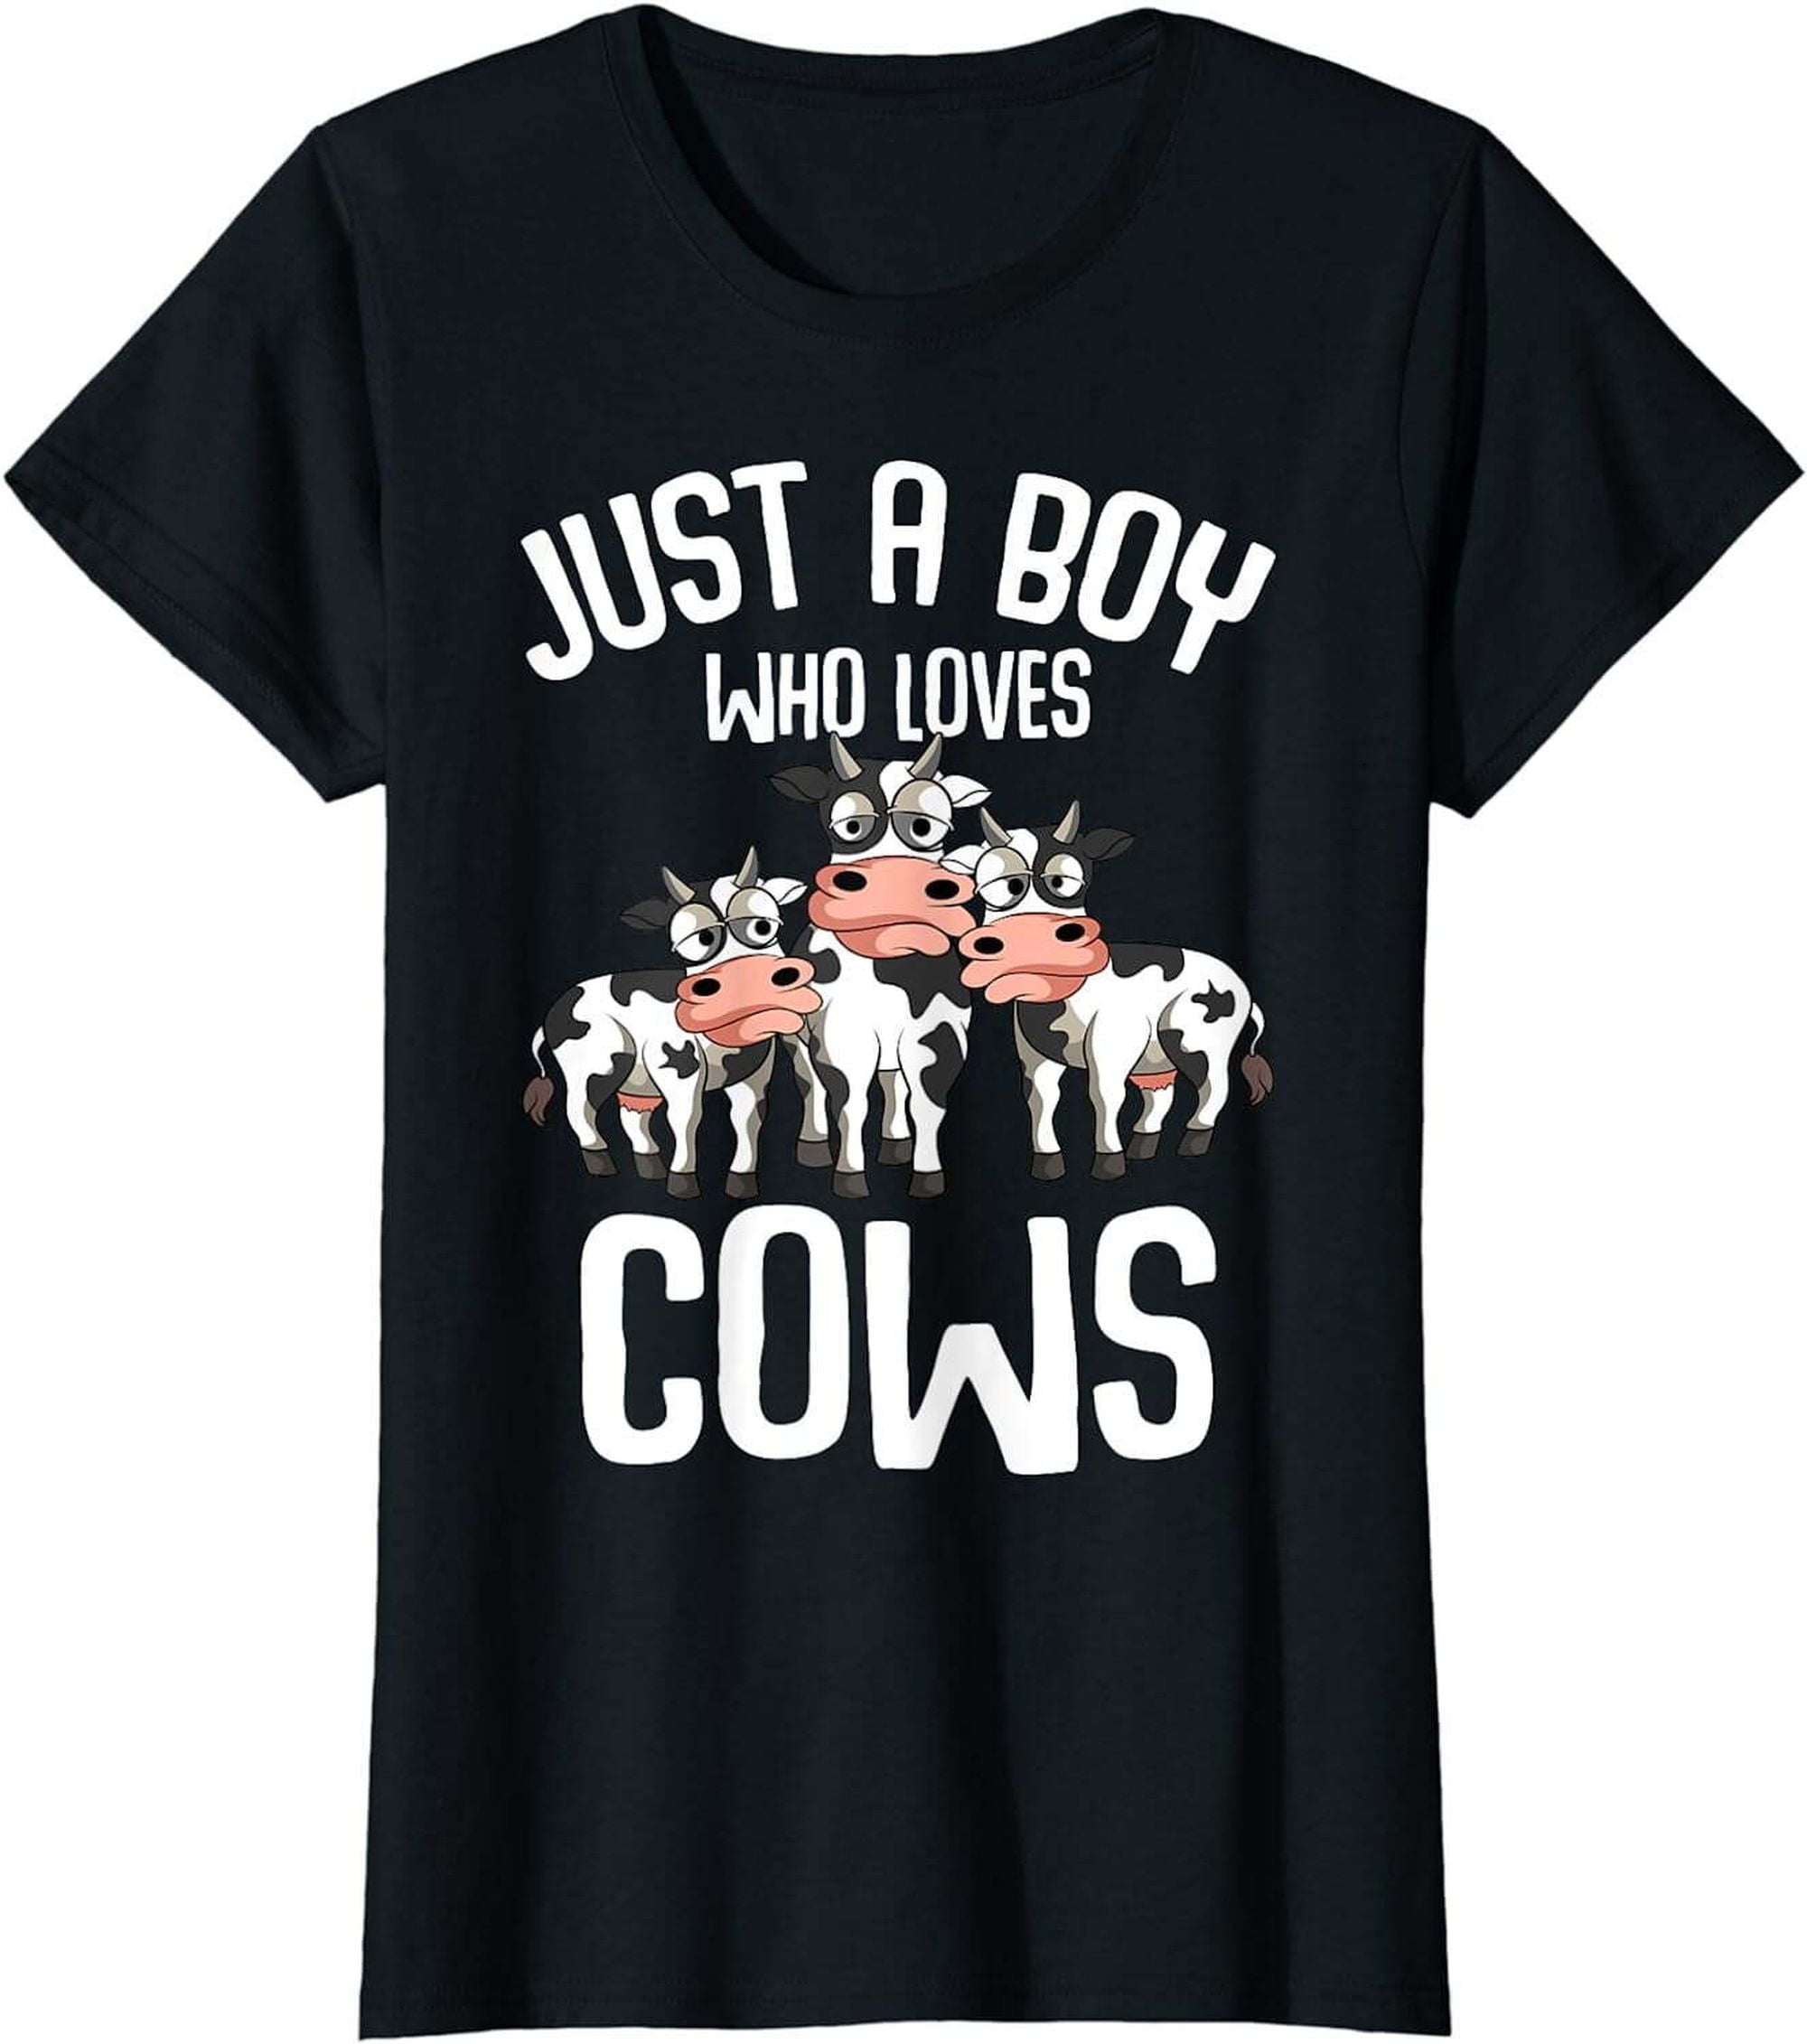 Adorable Cow-themed T-Shirts: A Young Boy's Passion for Utterly Cute ...